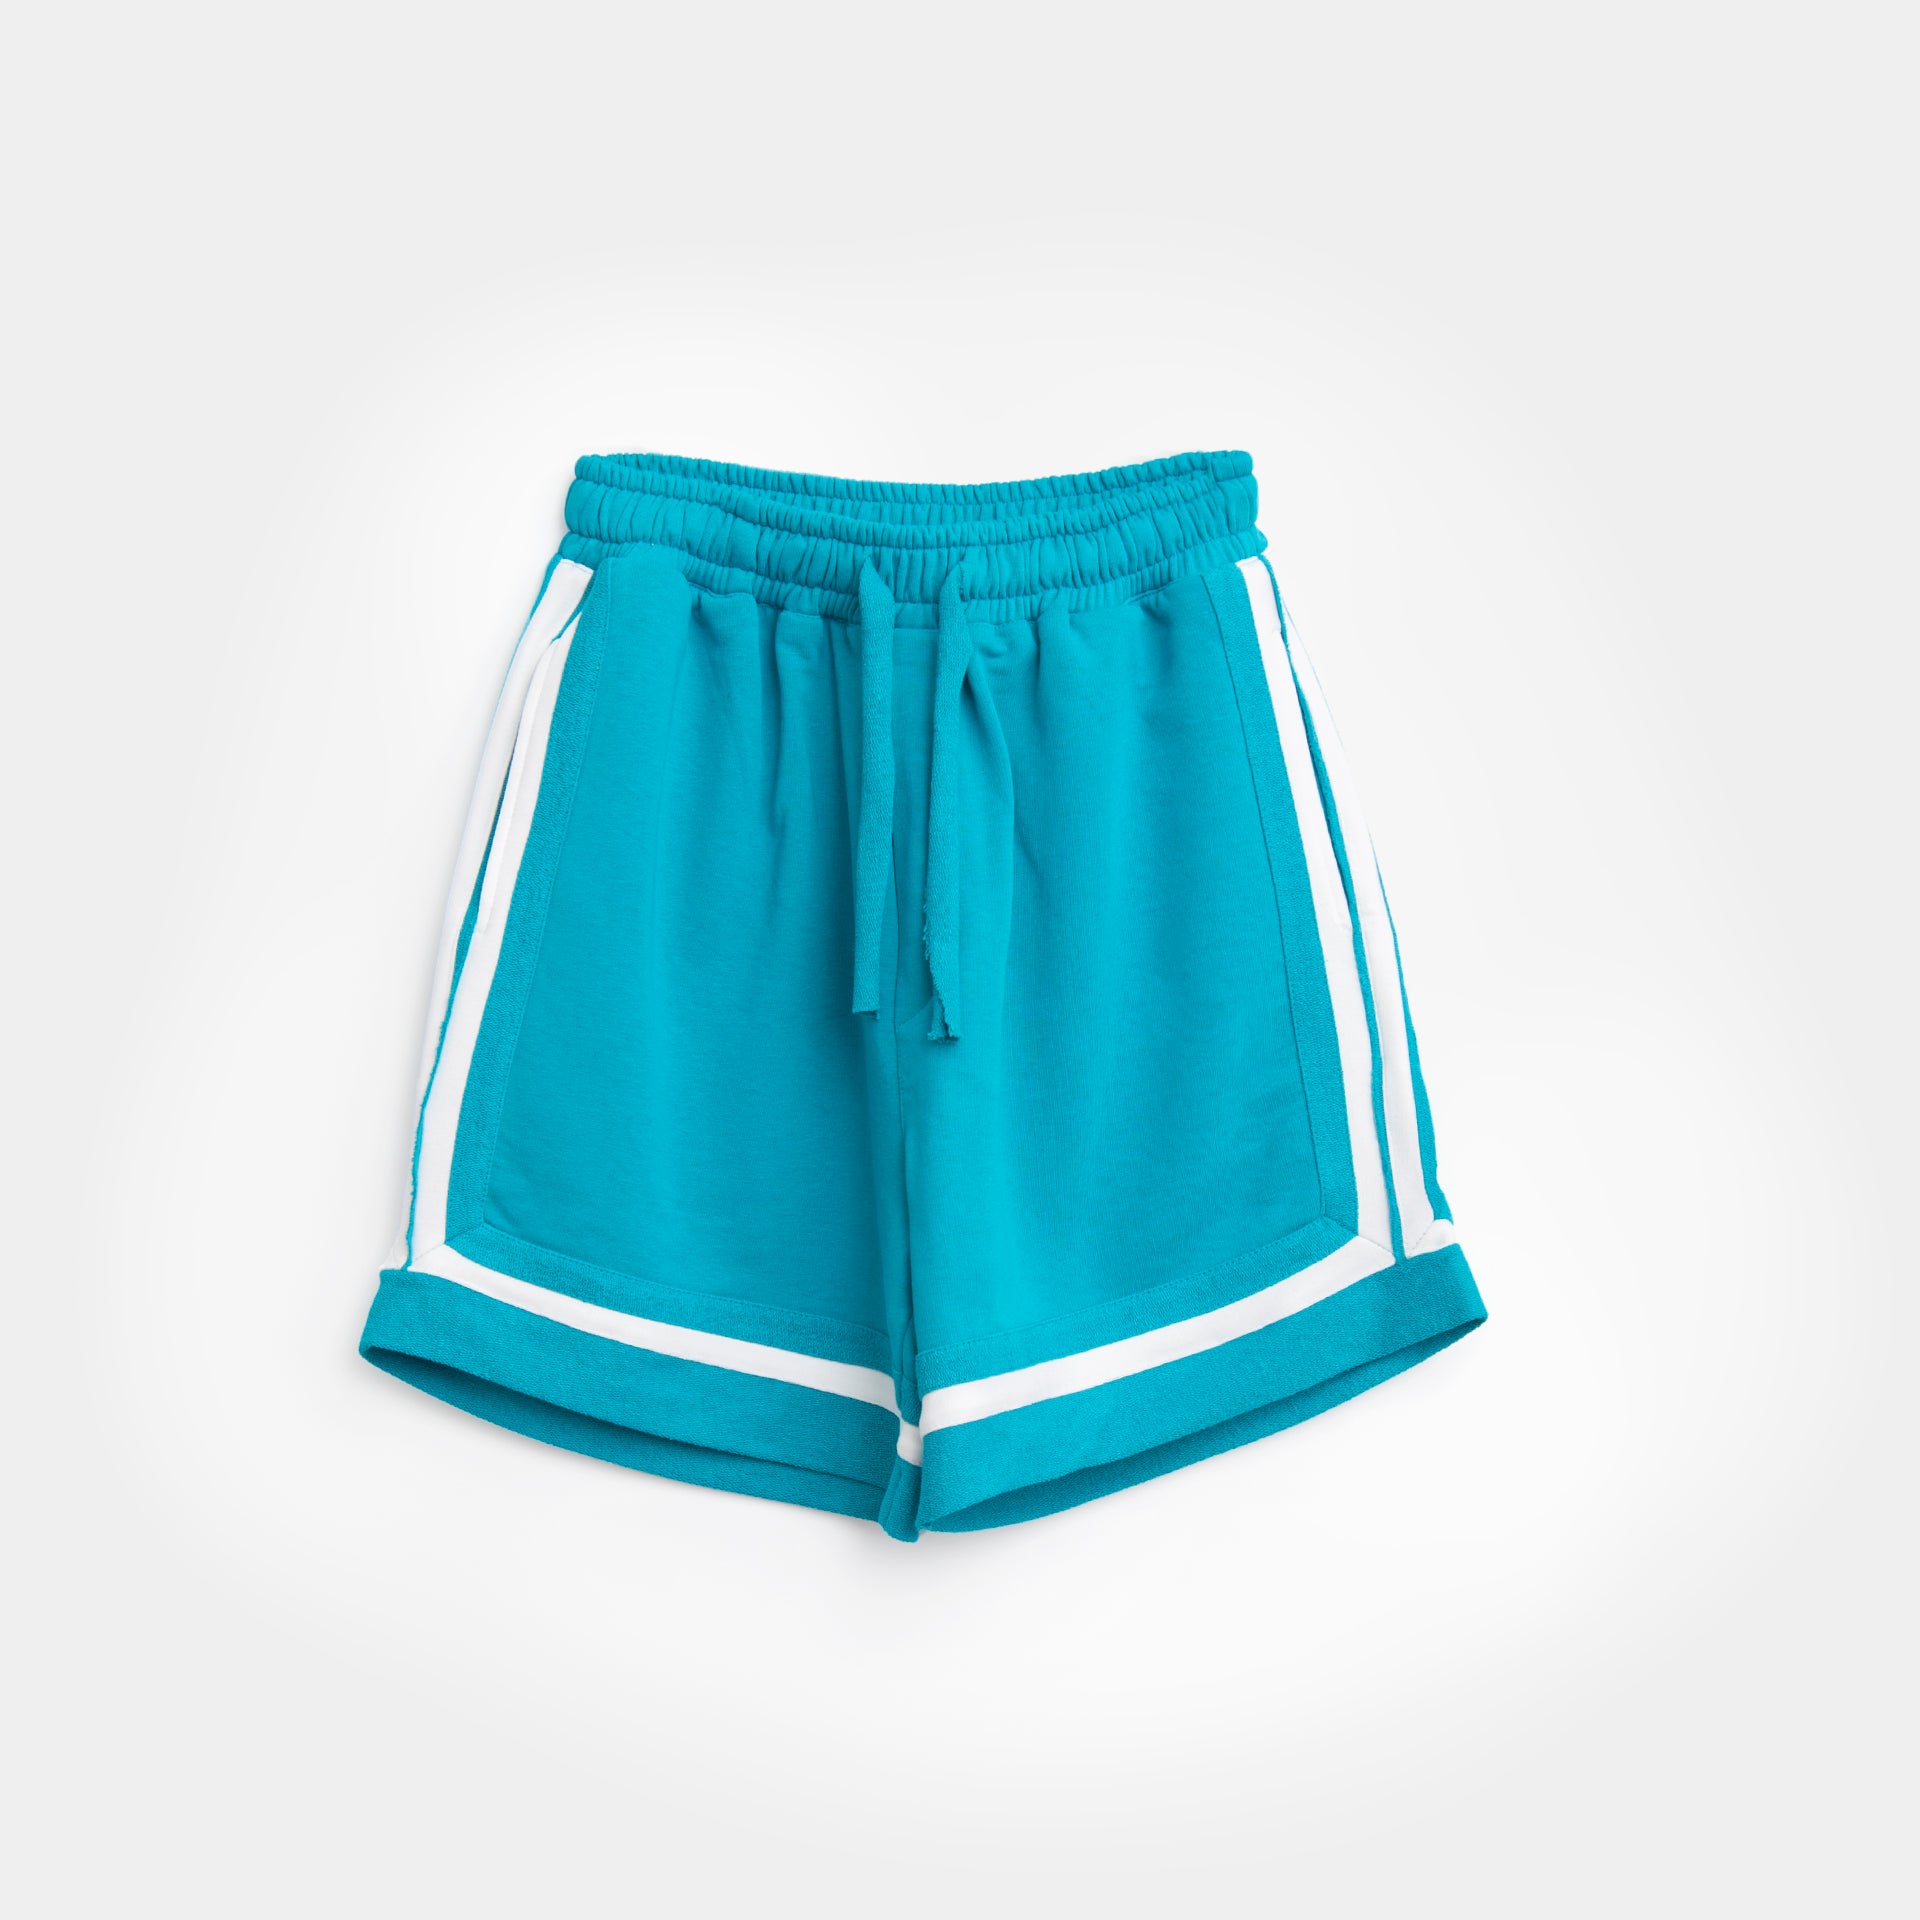 Turquoise Shorts From S32